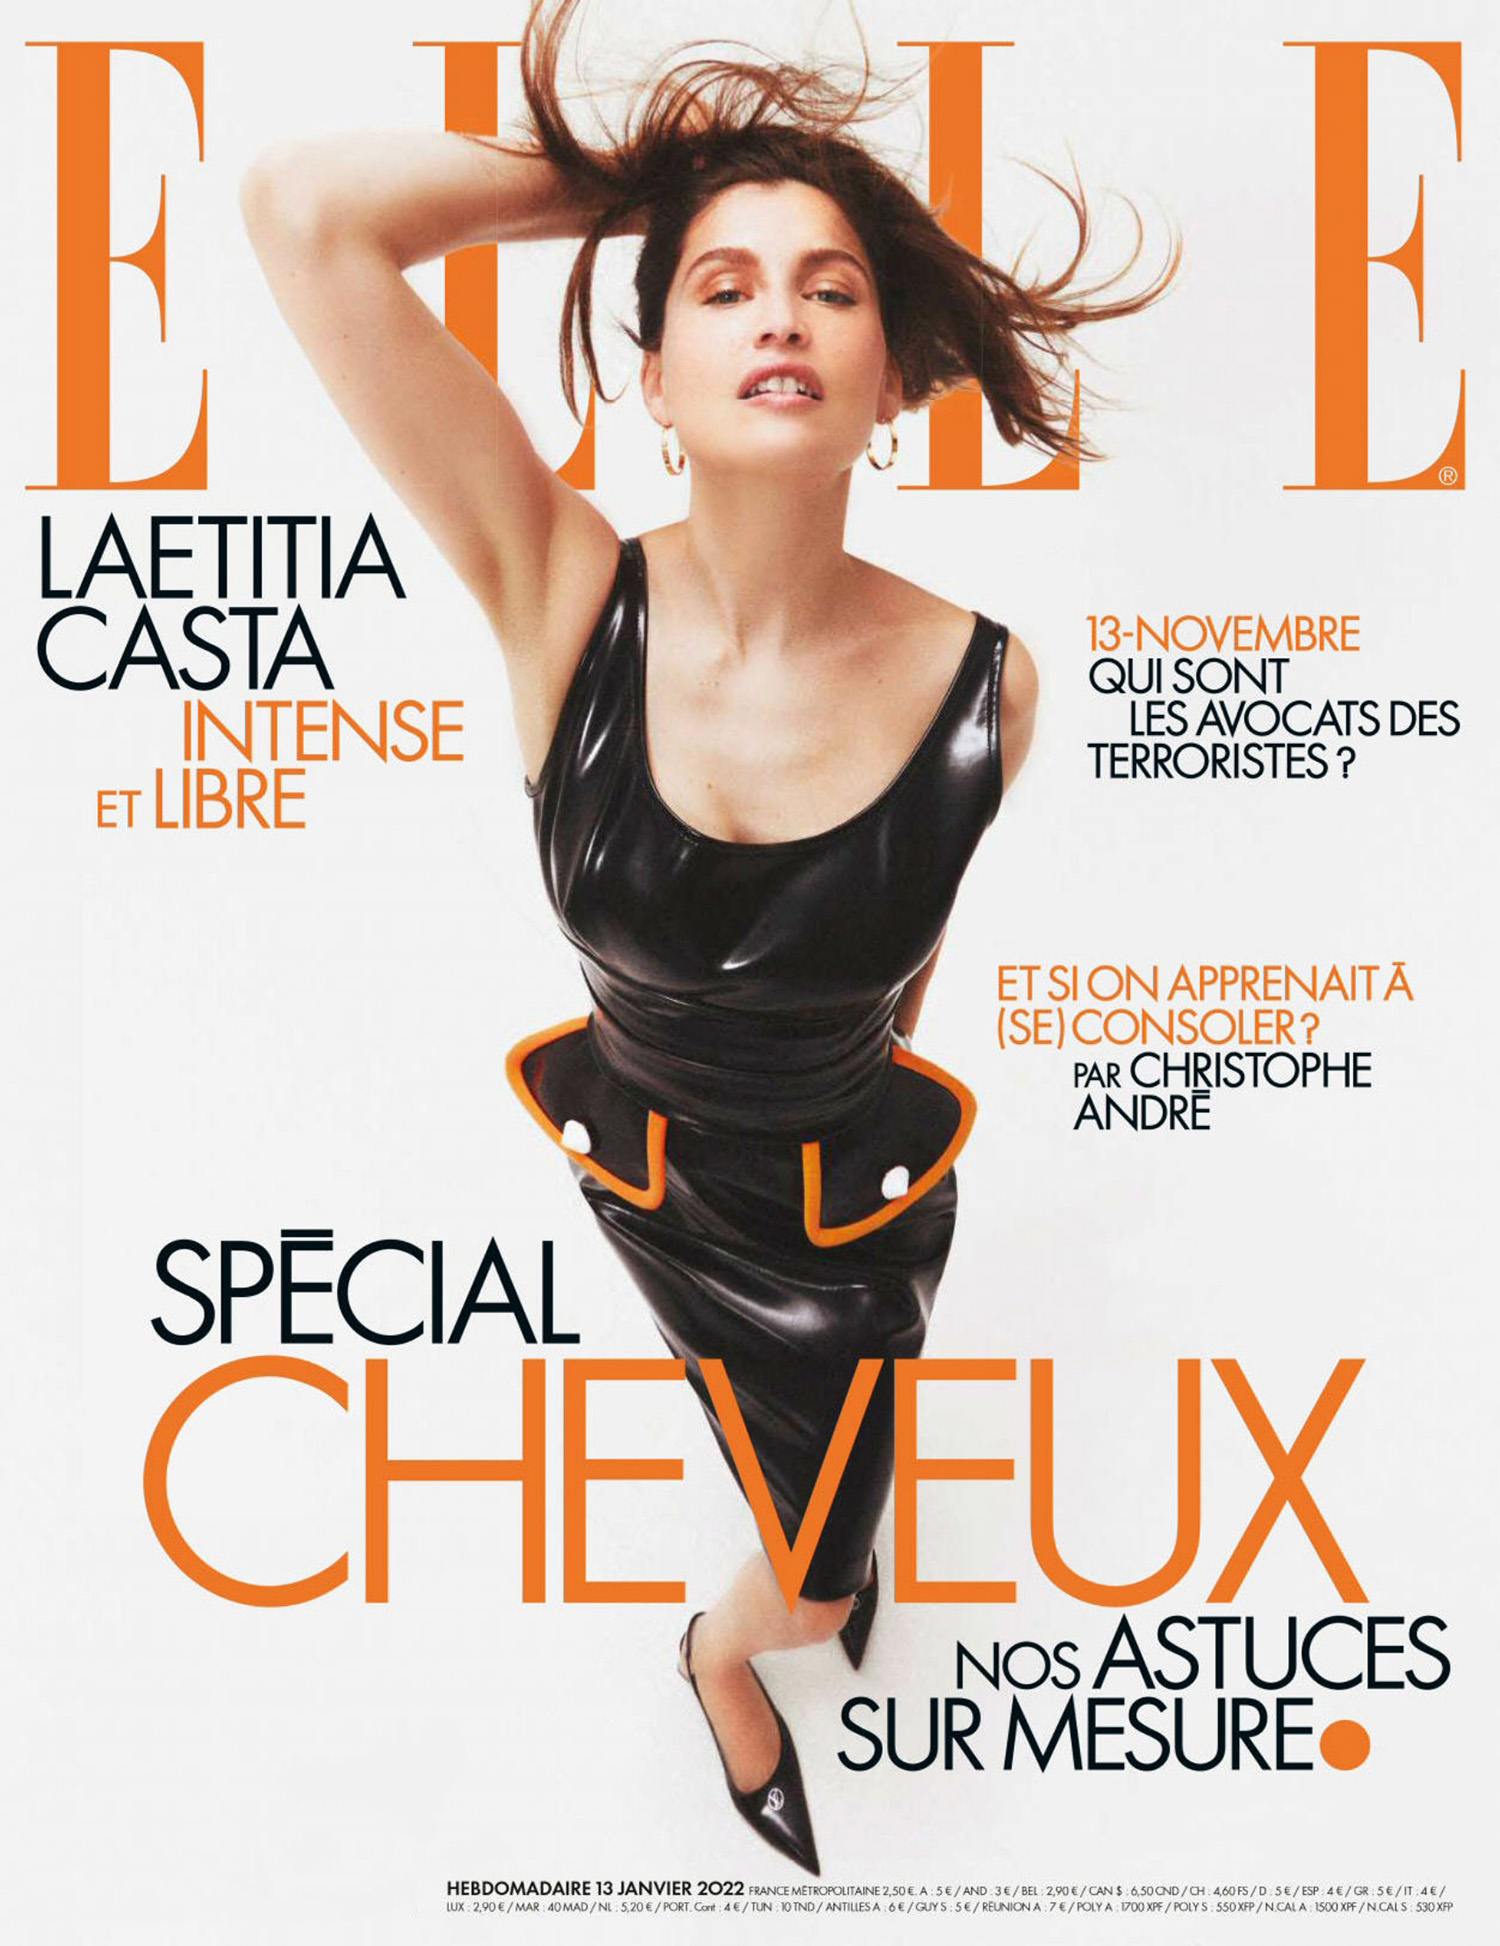 Laetitia Casta in Louis Vuitton on Elle France January 13th, 2022 cover by Julien Vallon